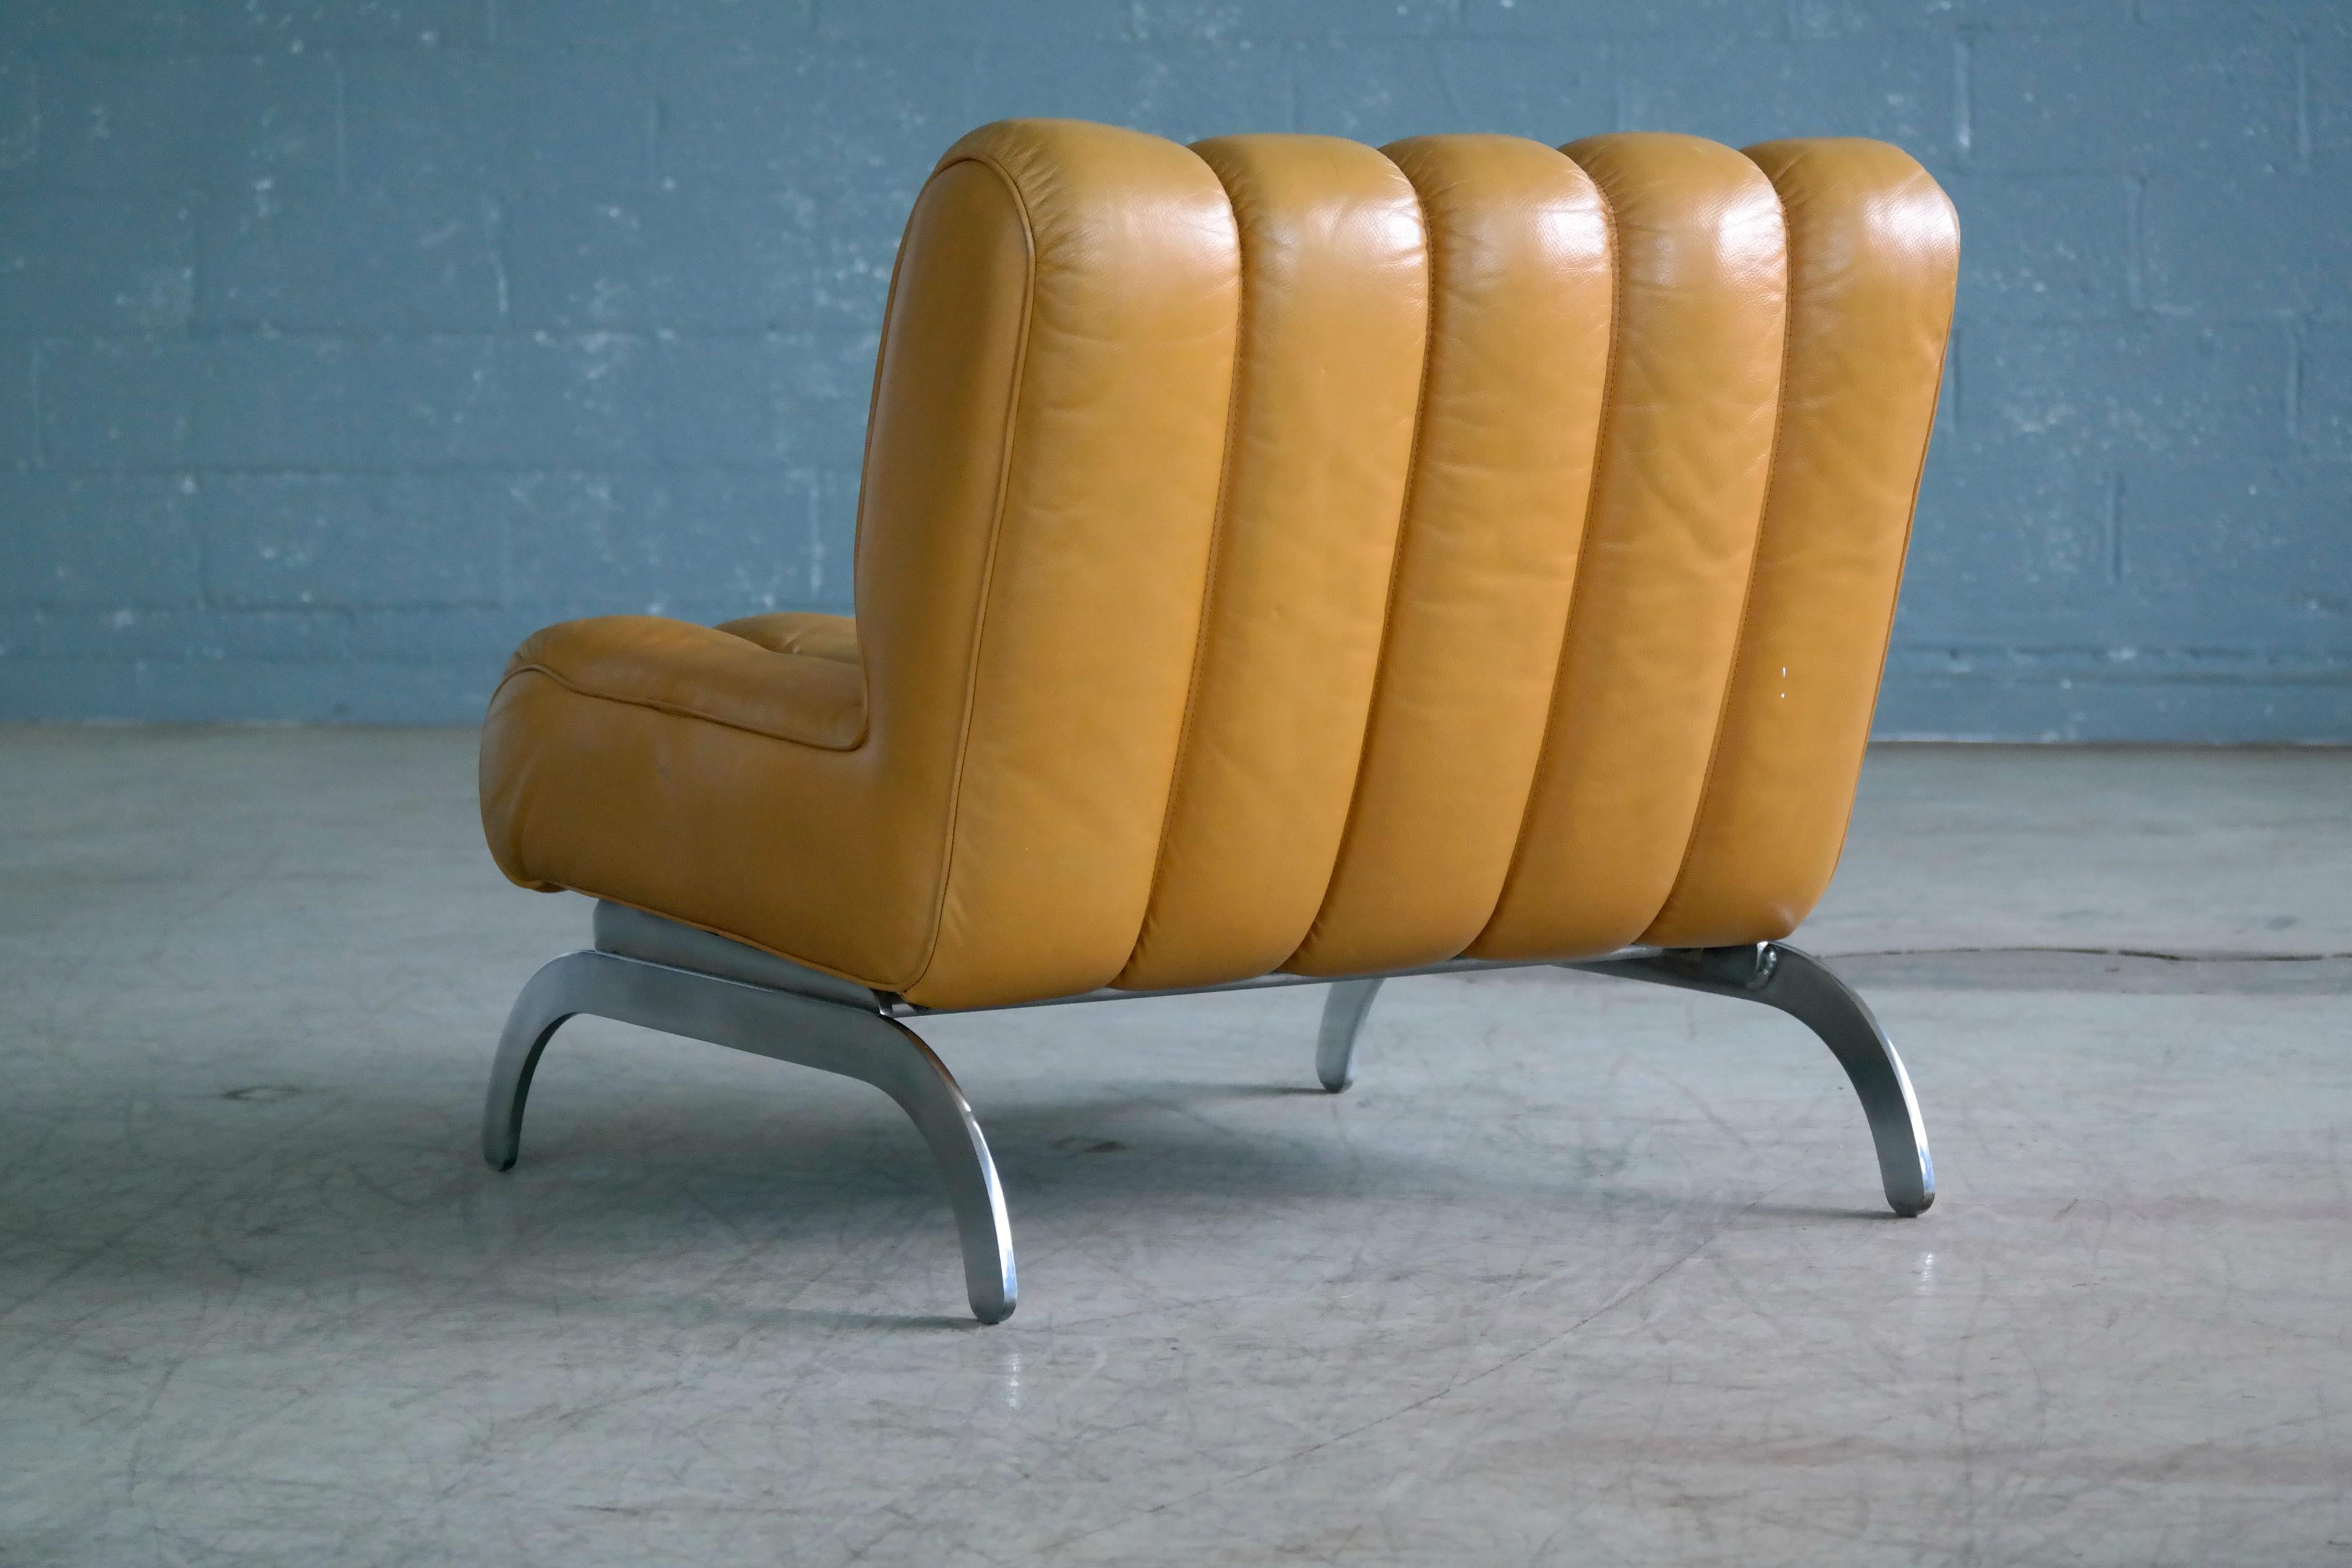 Stainless Steel Midcentury Independence Lounge Chair in Mustard Yellow Leather by Karl Wittmann